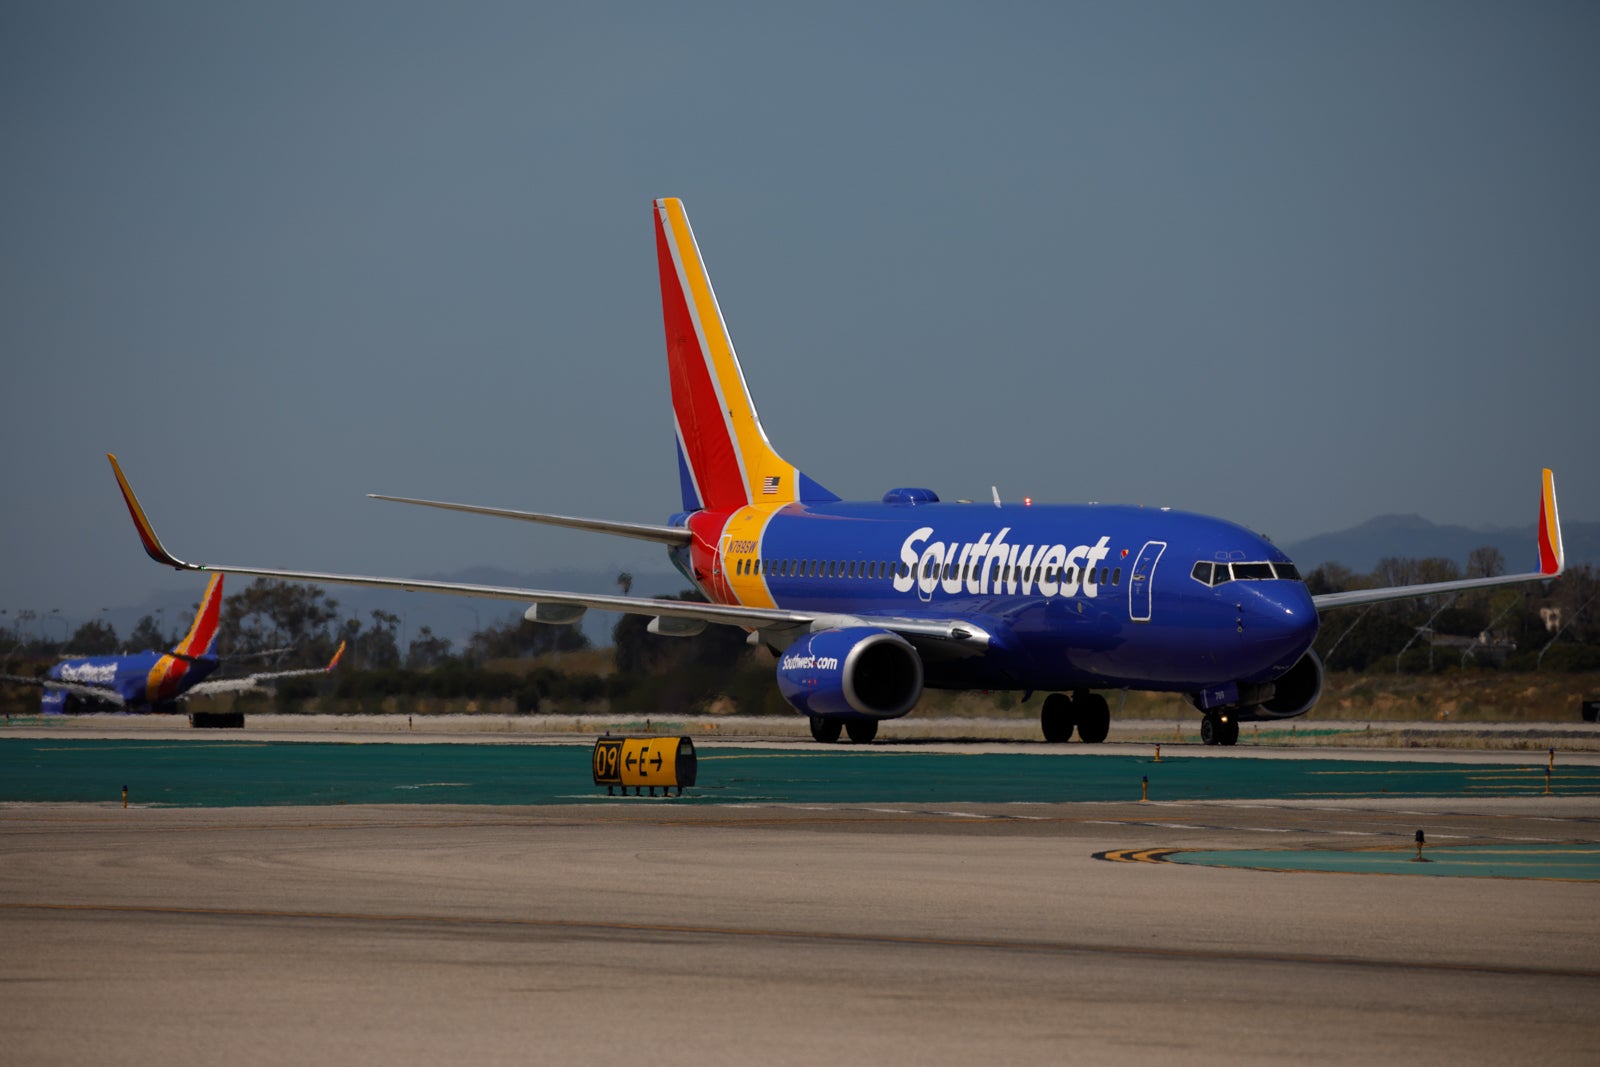 southwest airlines tracker